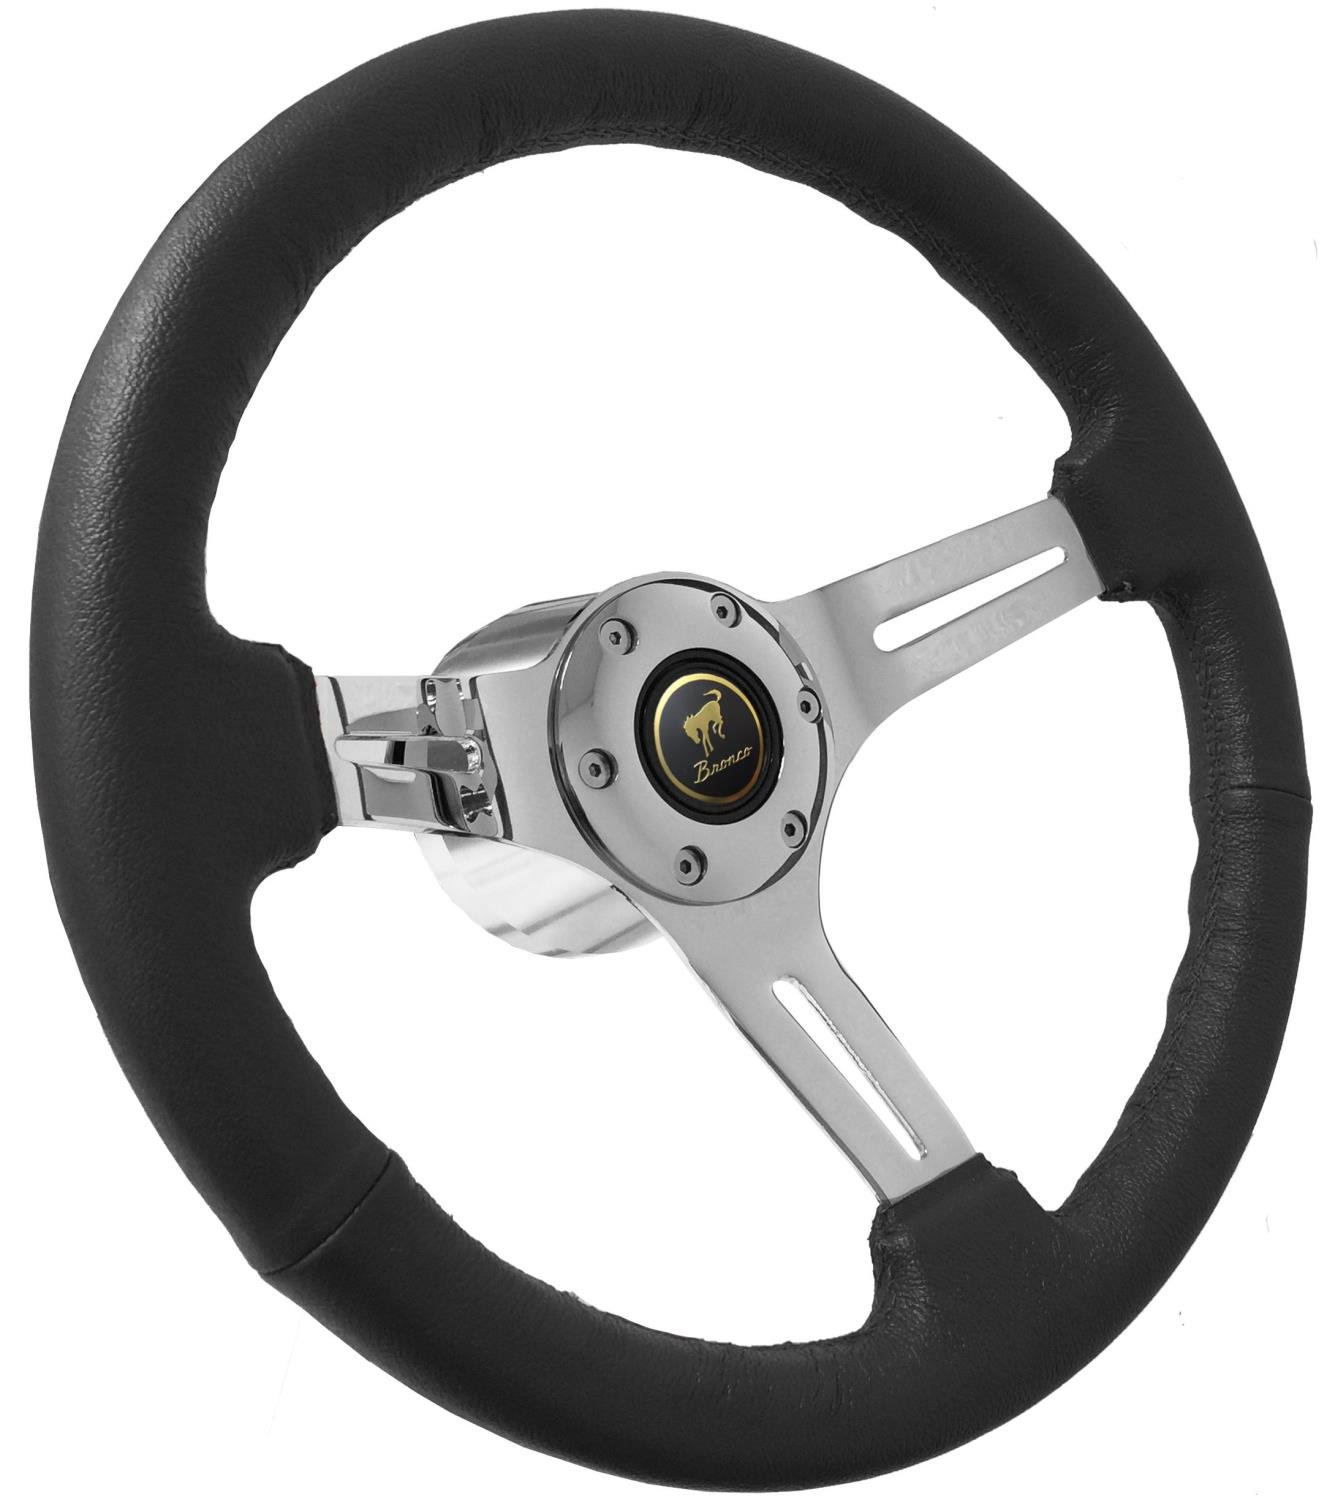 S6 Sport Steering Wheel Kit for 1964-1972 Ford/Mercury, 14 in. Diameter, Black Leather Grip, with 6-Bolt Adapter and Horn Button